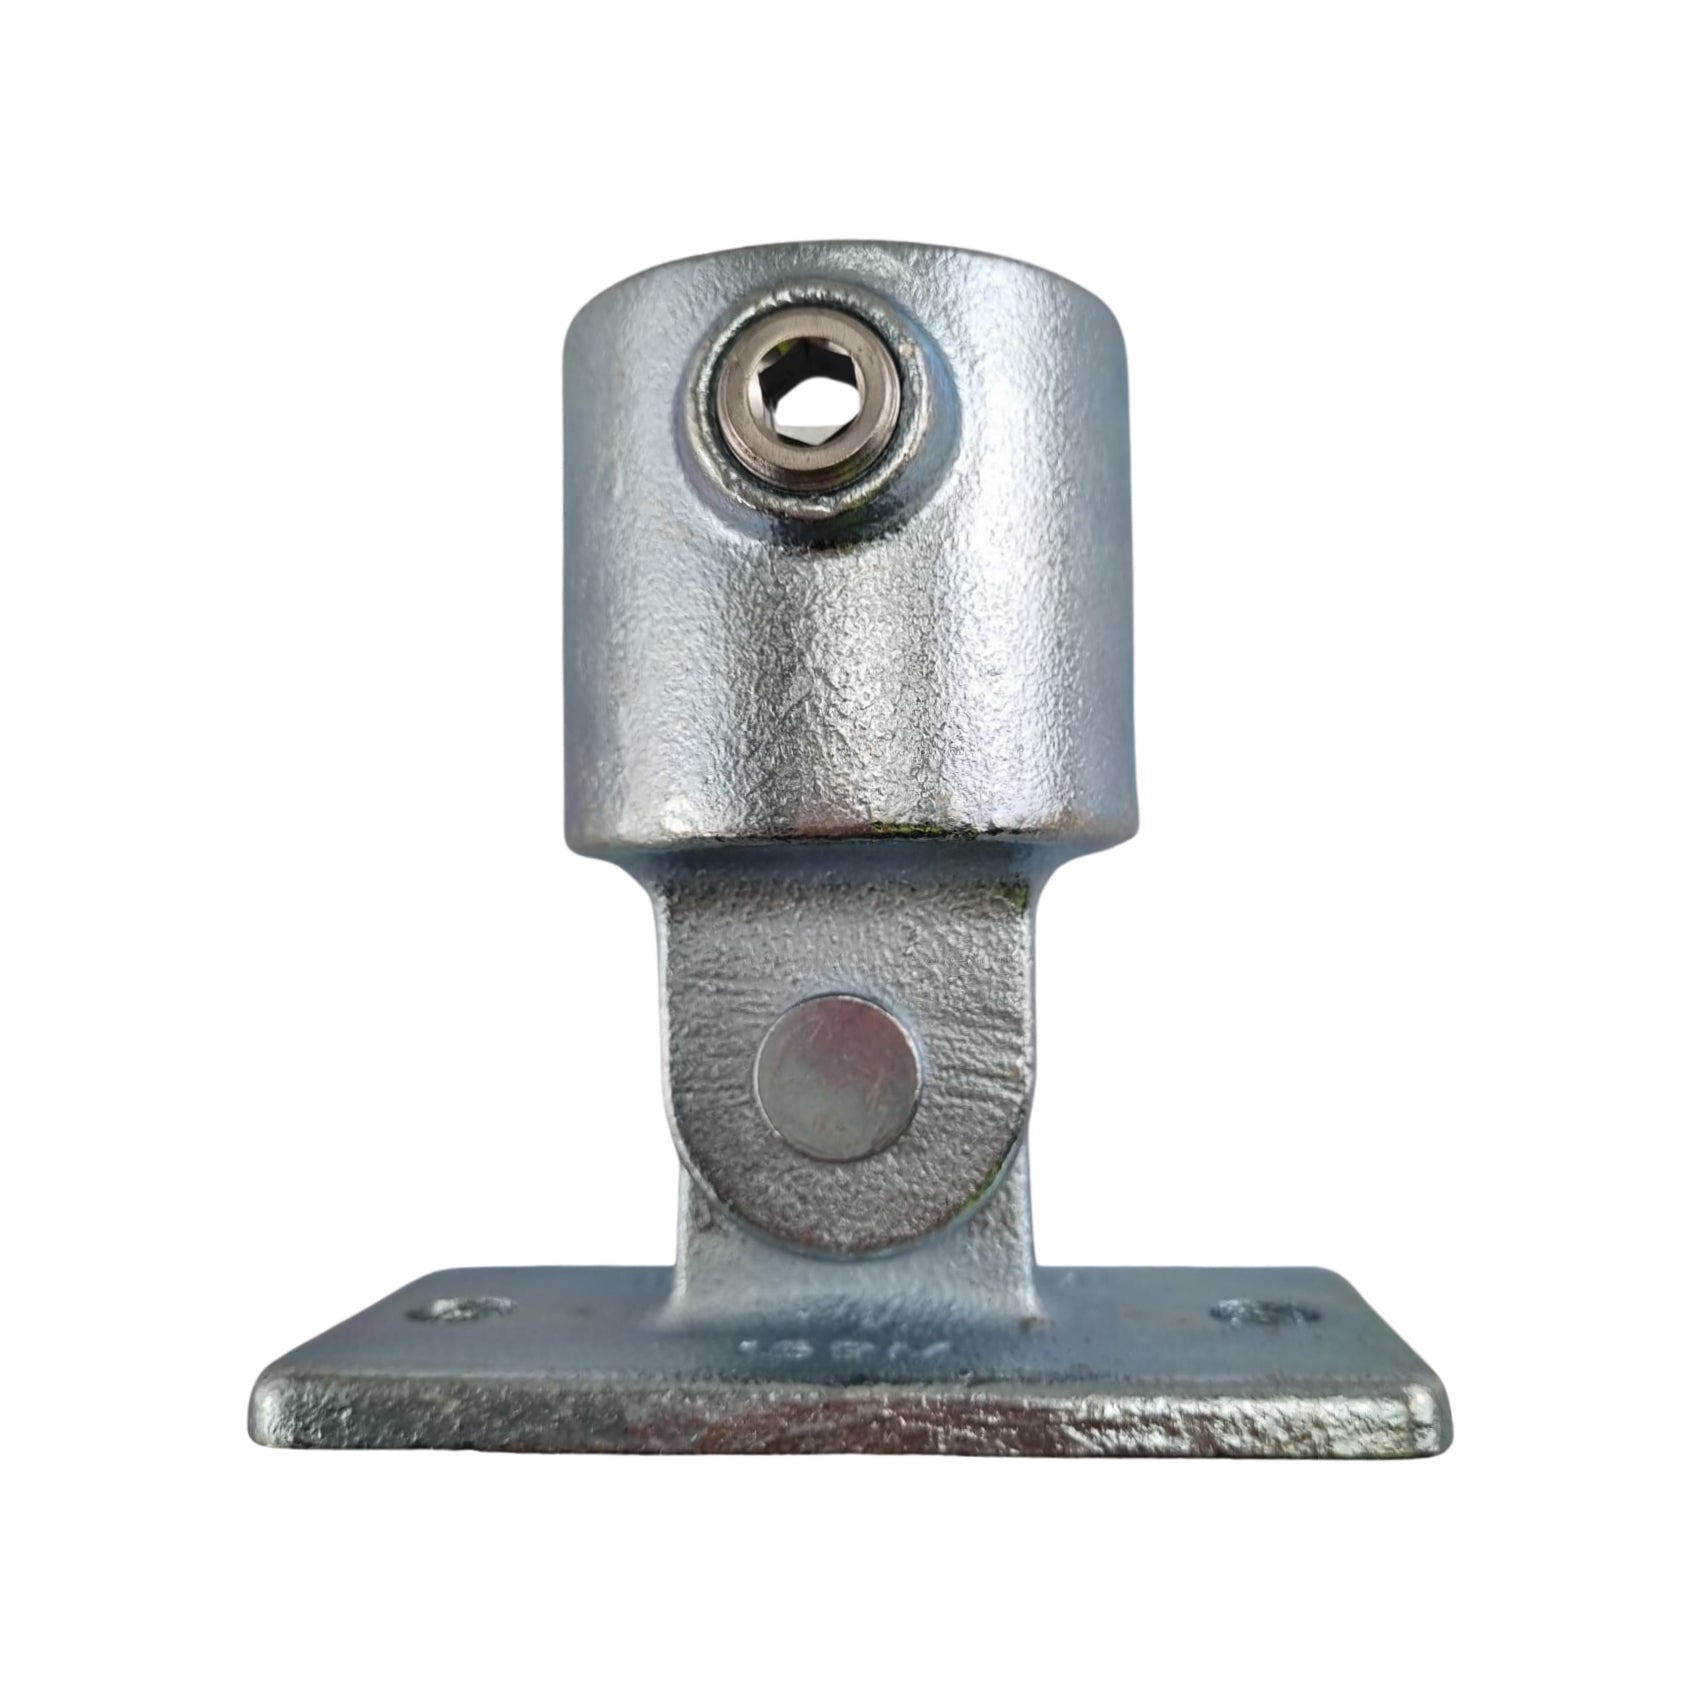 Swivel Base Flange for Galvanised Pipe (Interclamp Code 169). Shop chain.com.au. Australia wide shipping.